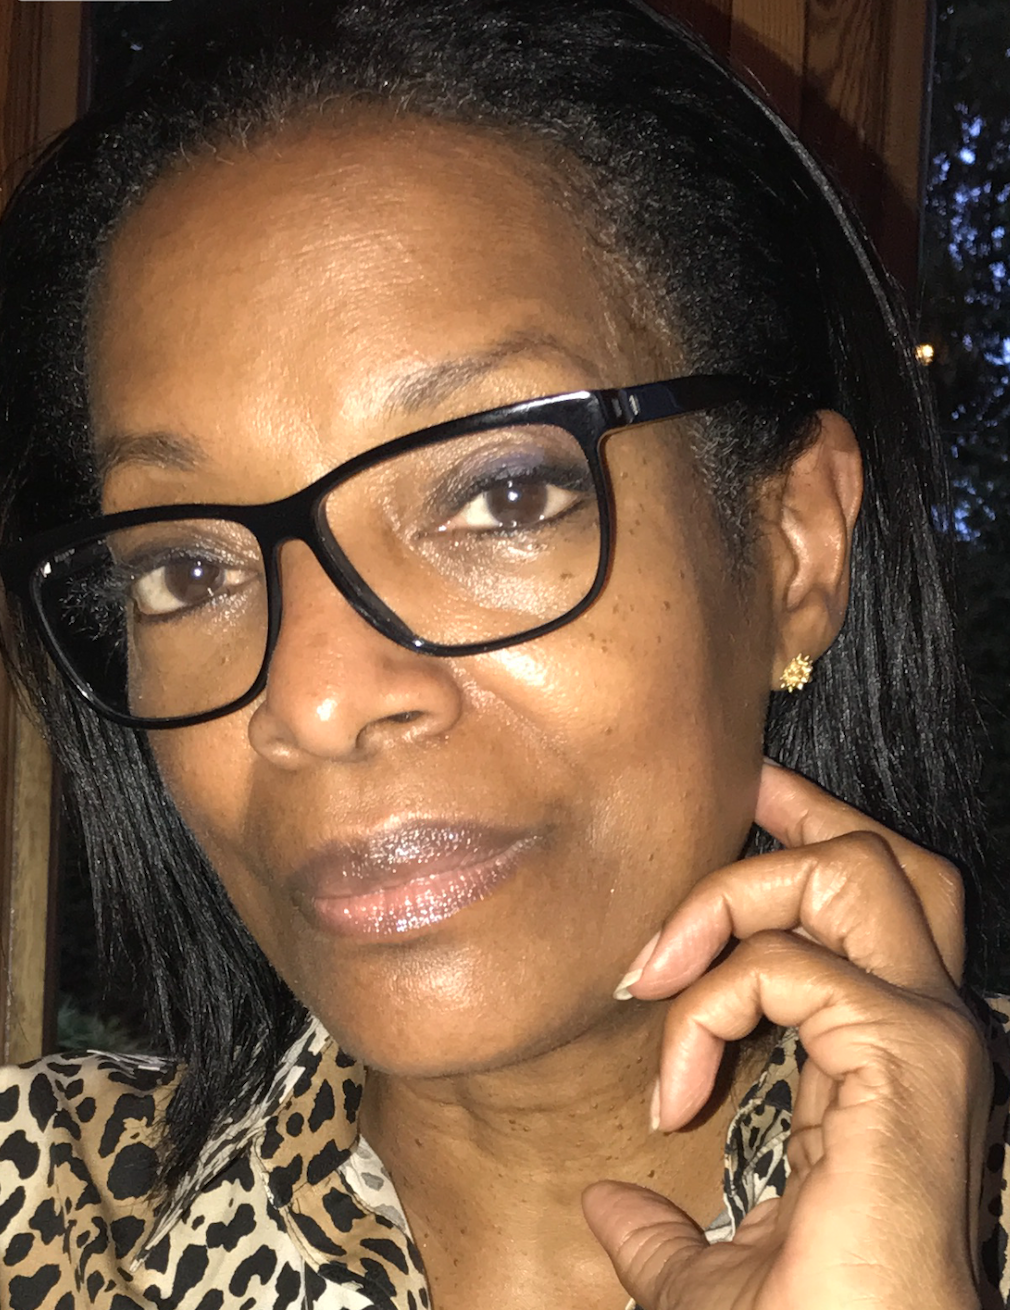 A photo of Patricia Viseur Sellers Esq, wearing black-rimmed glasses.